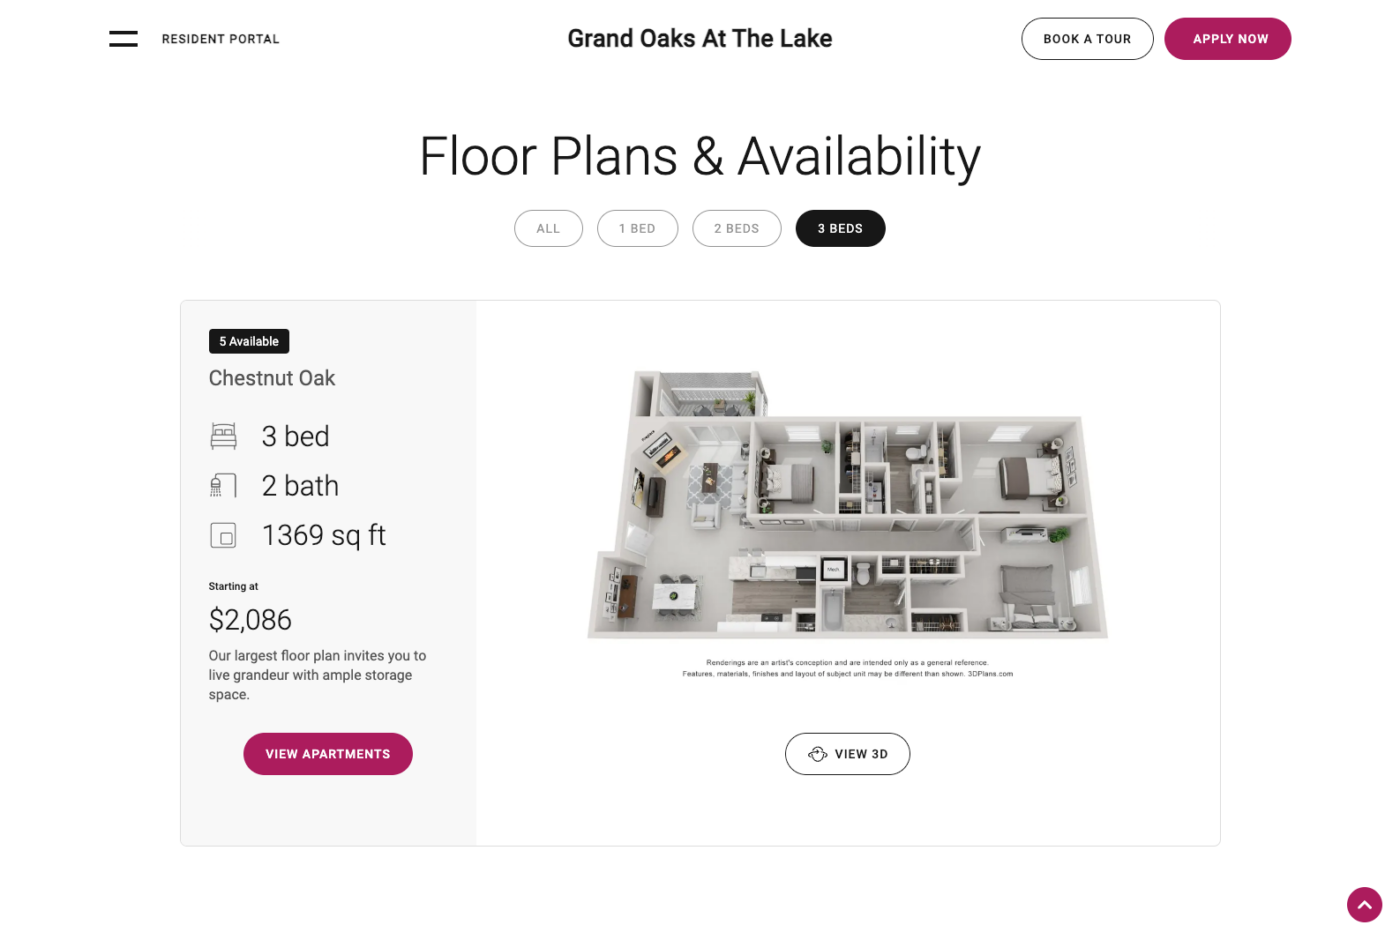 Floor plans and availability design